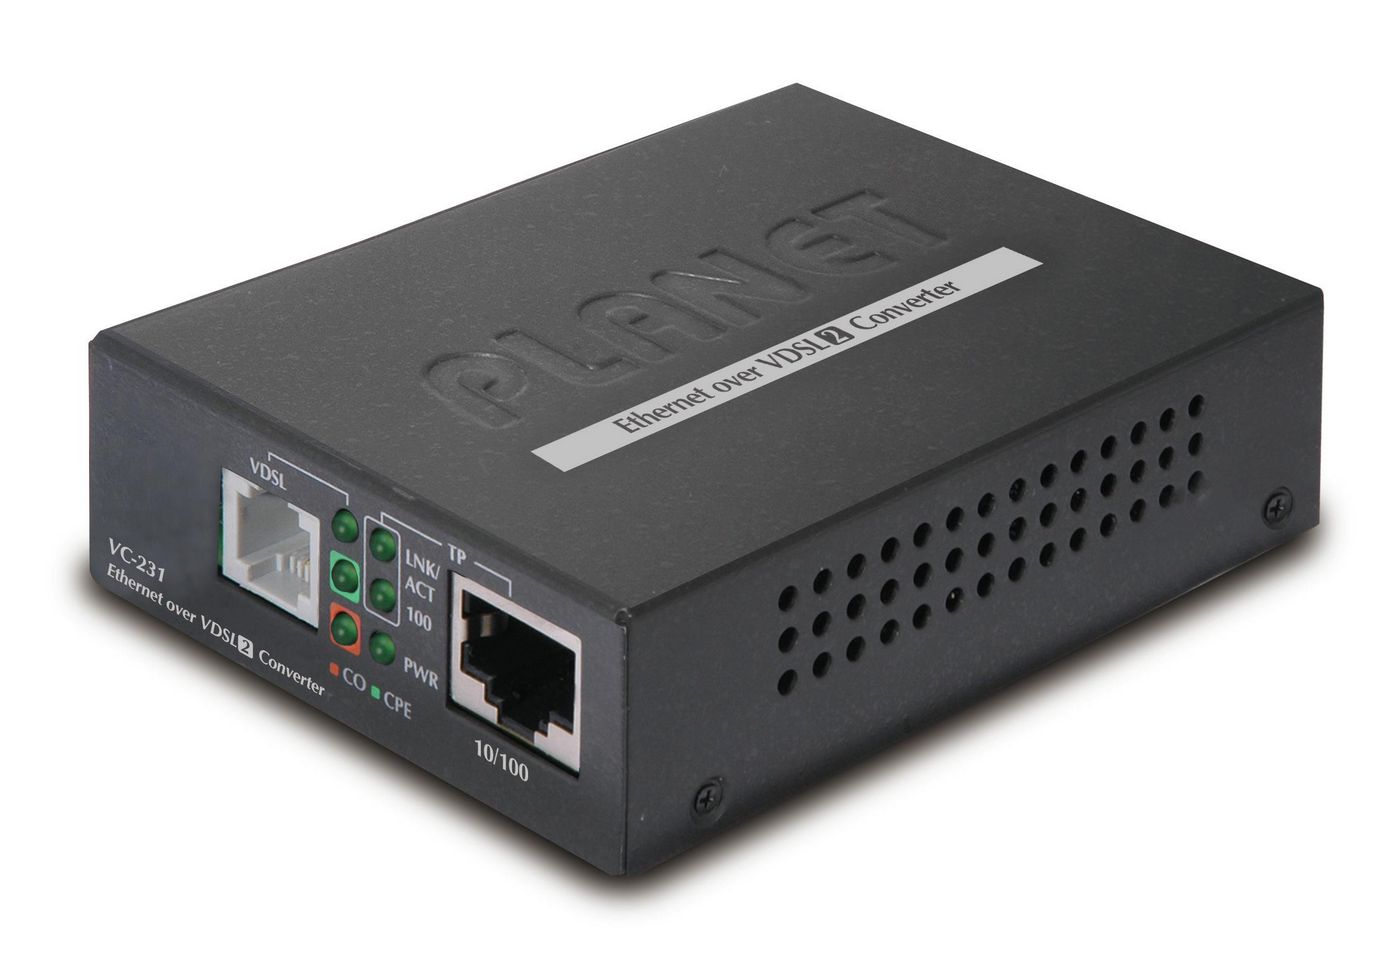 Planet VC-231-UK 100100 Mbps Ethernet to 